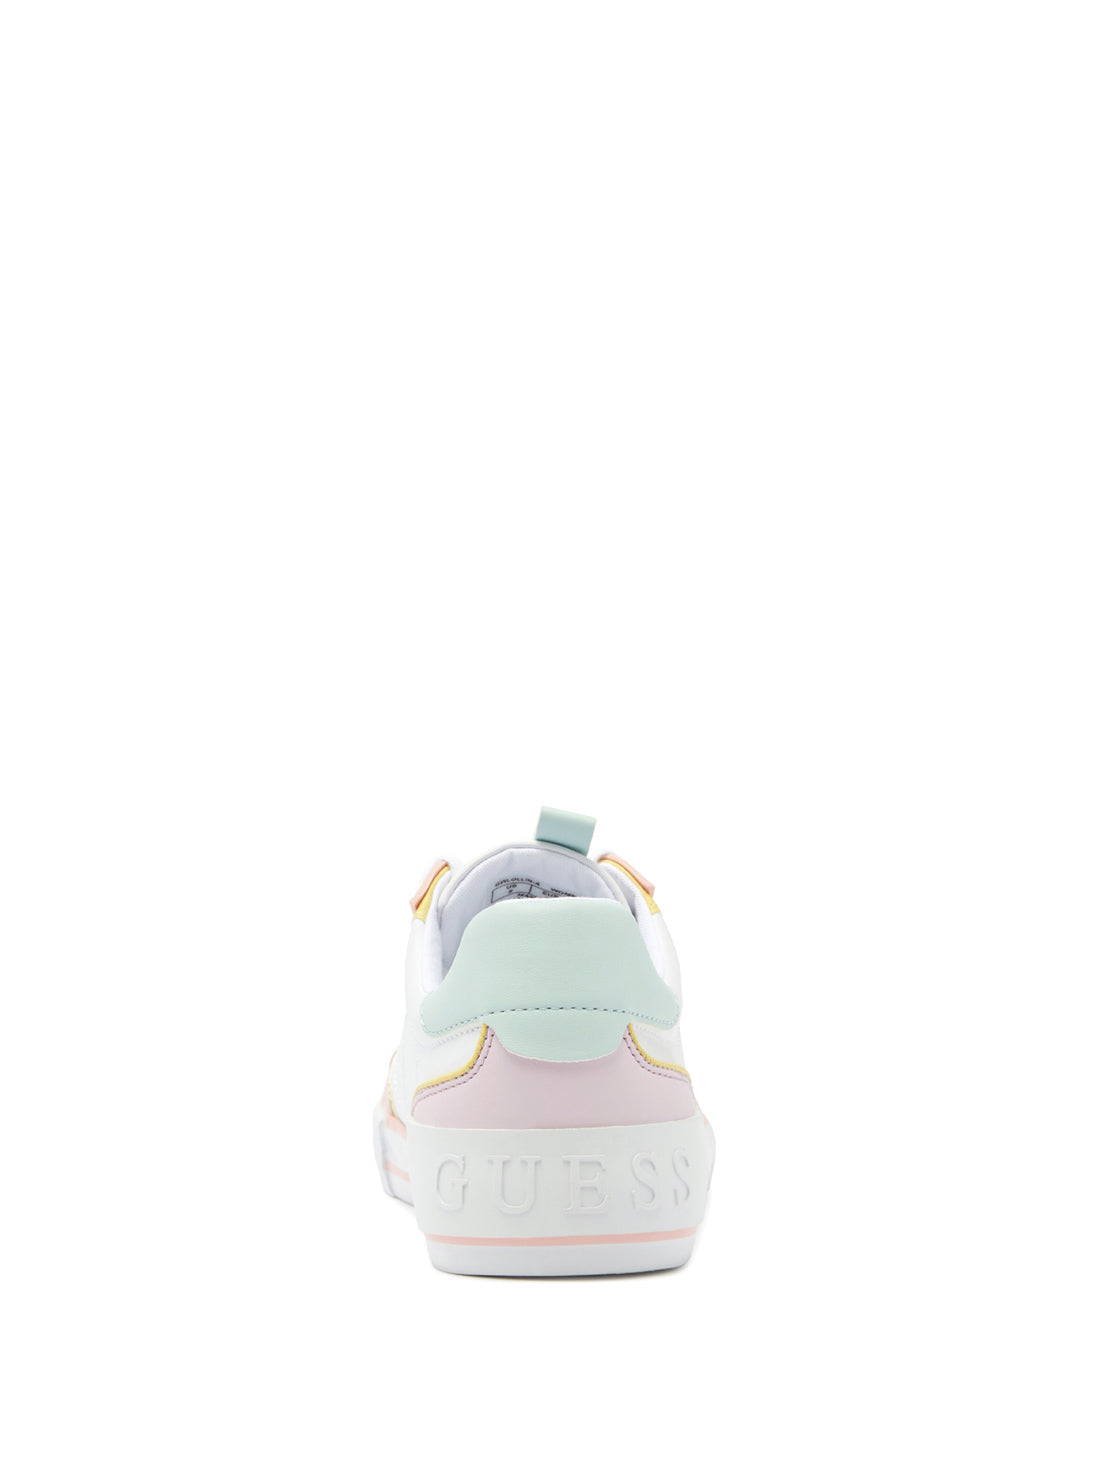 GUESS Women's White Pink Lollin Low Top Sneakers LOLLIN-A WHI04 Back View